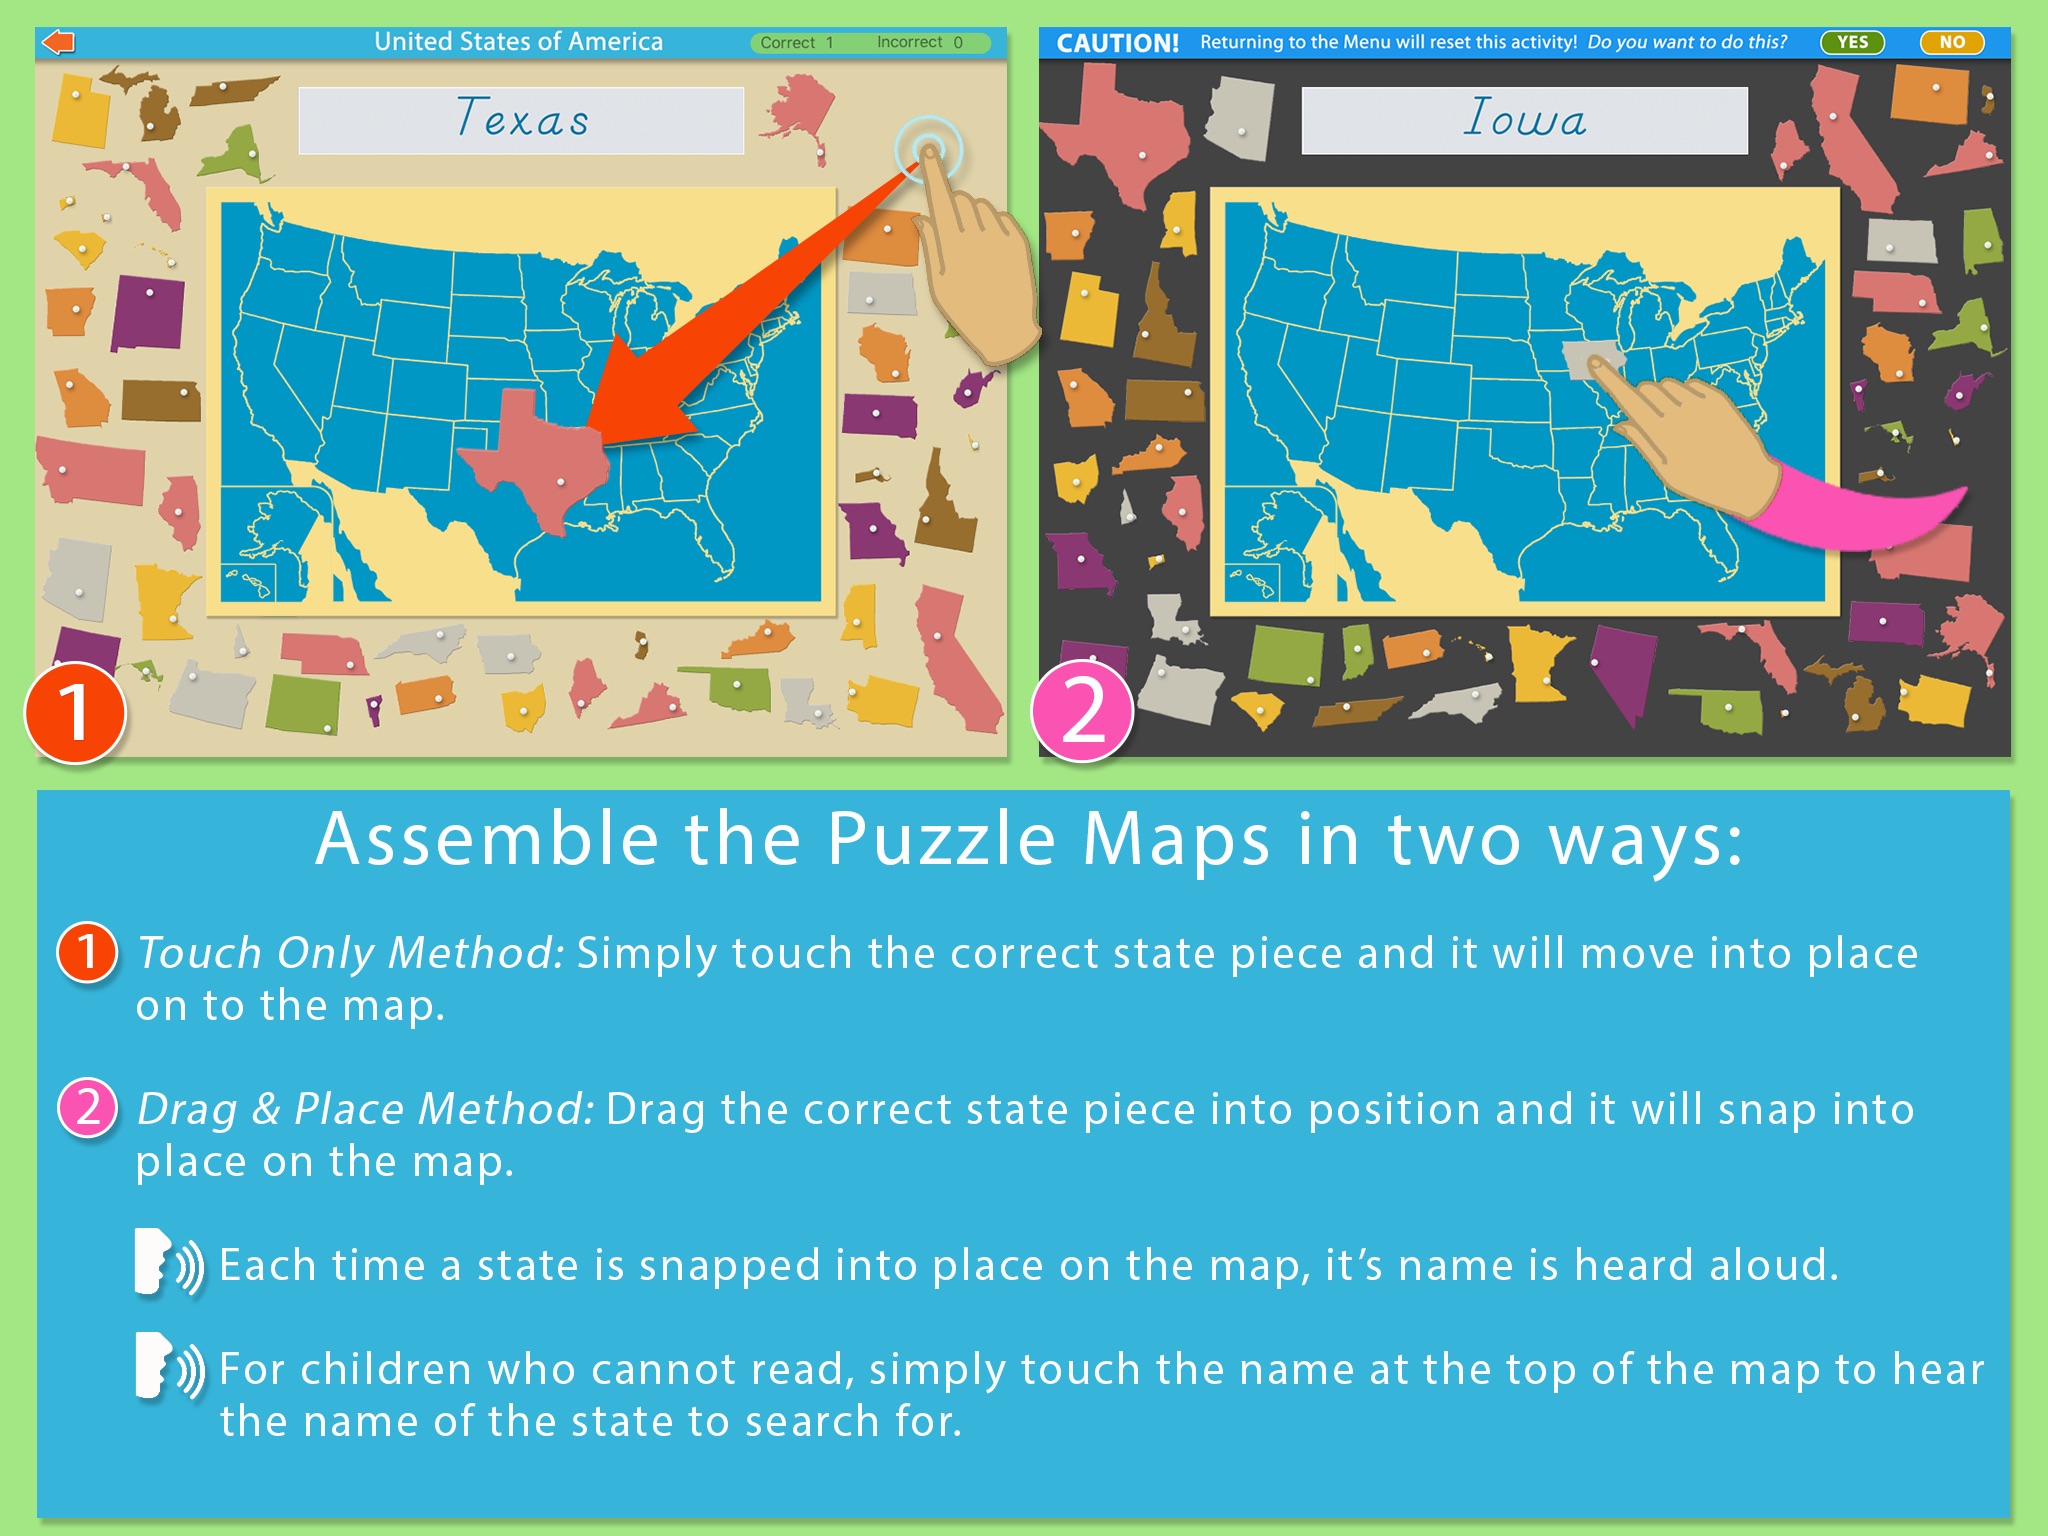 United States Of America LITE - A Montessori Approach To Geography screenshot 4